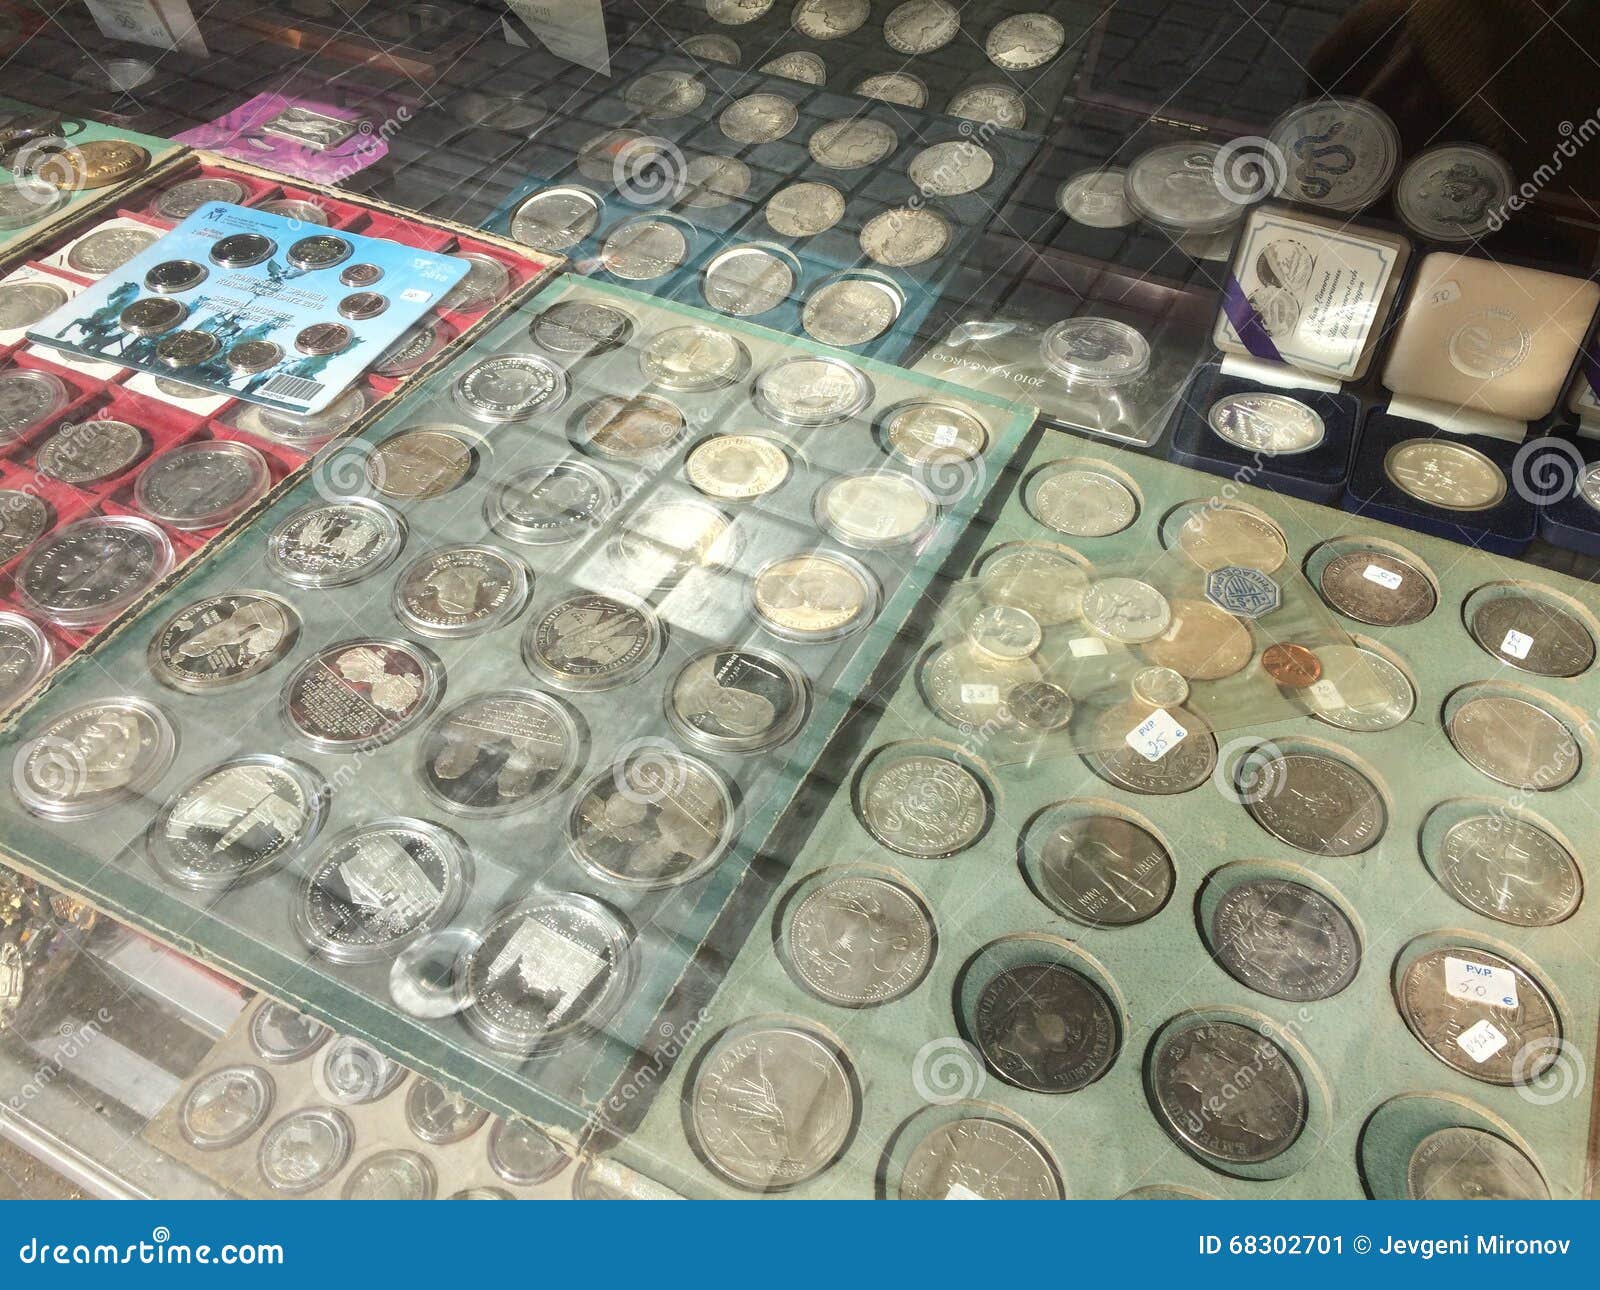 5 Best Places To Sell Rare Coins and Paper Money